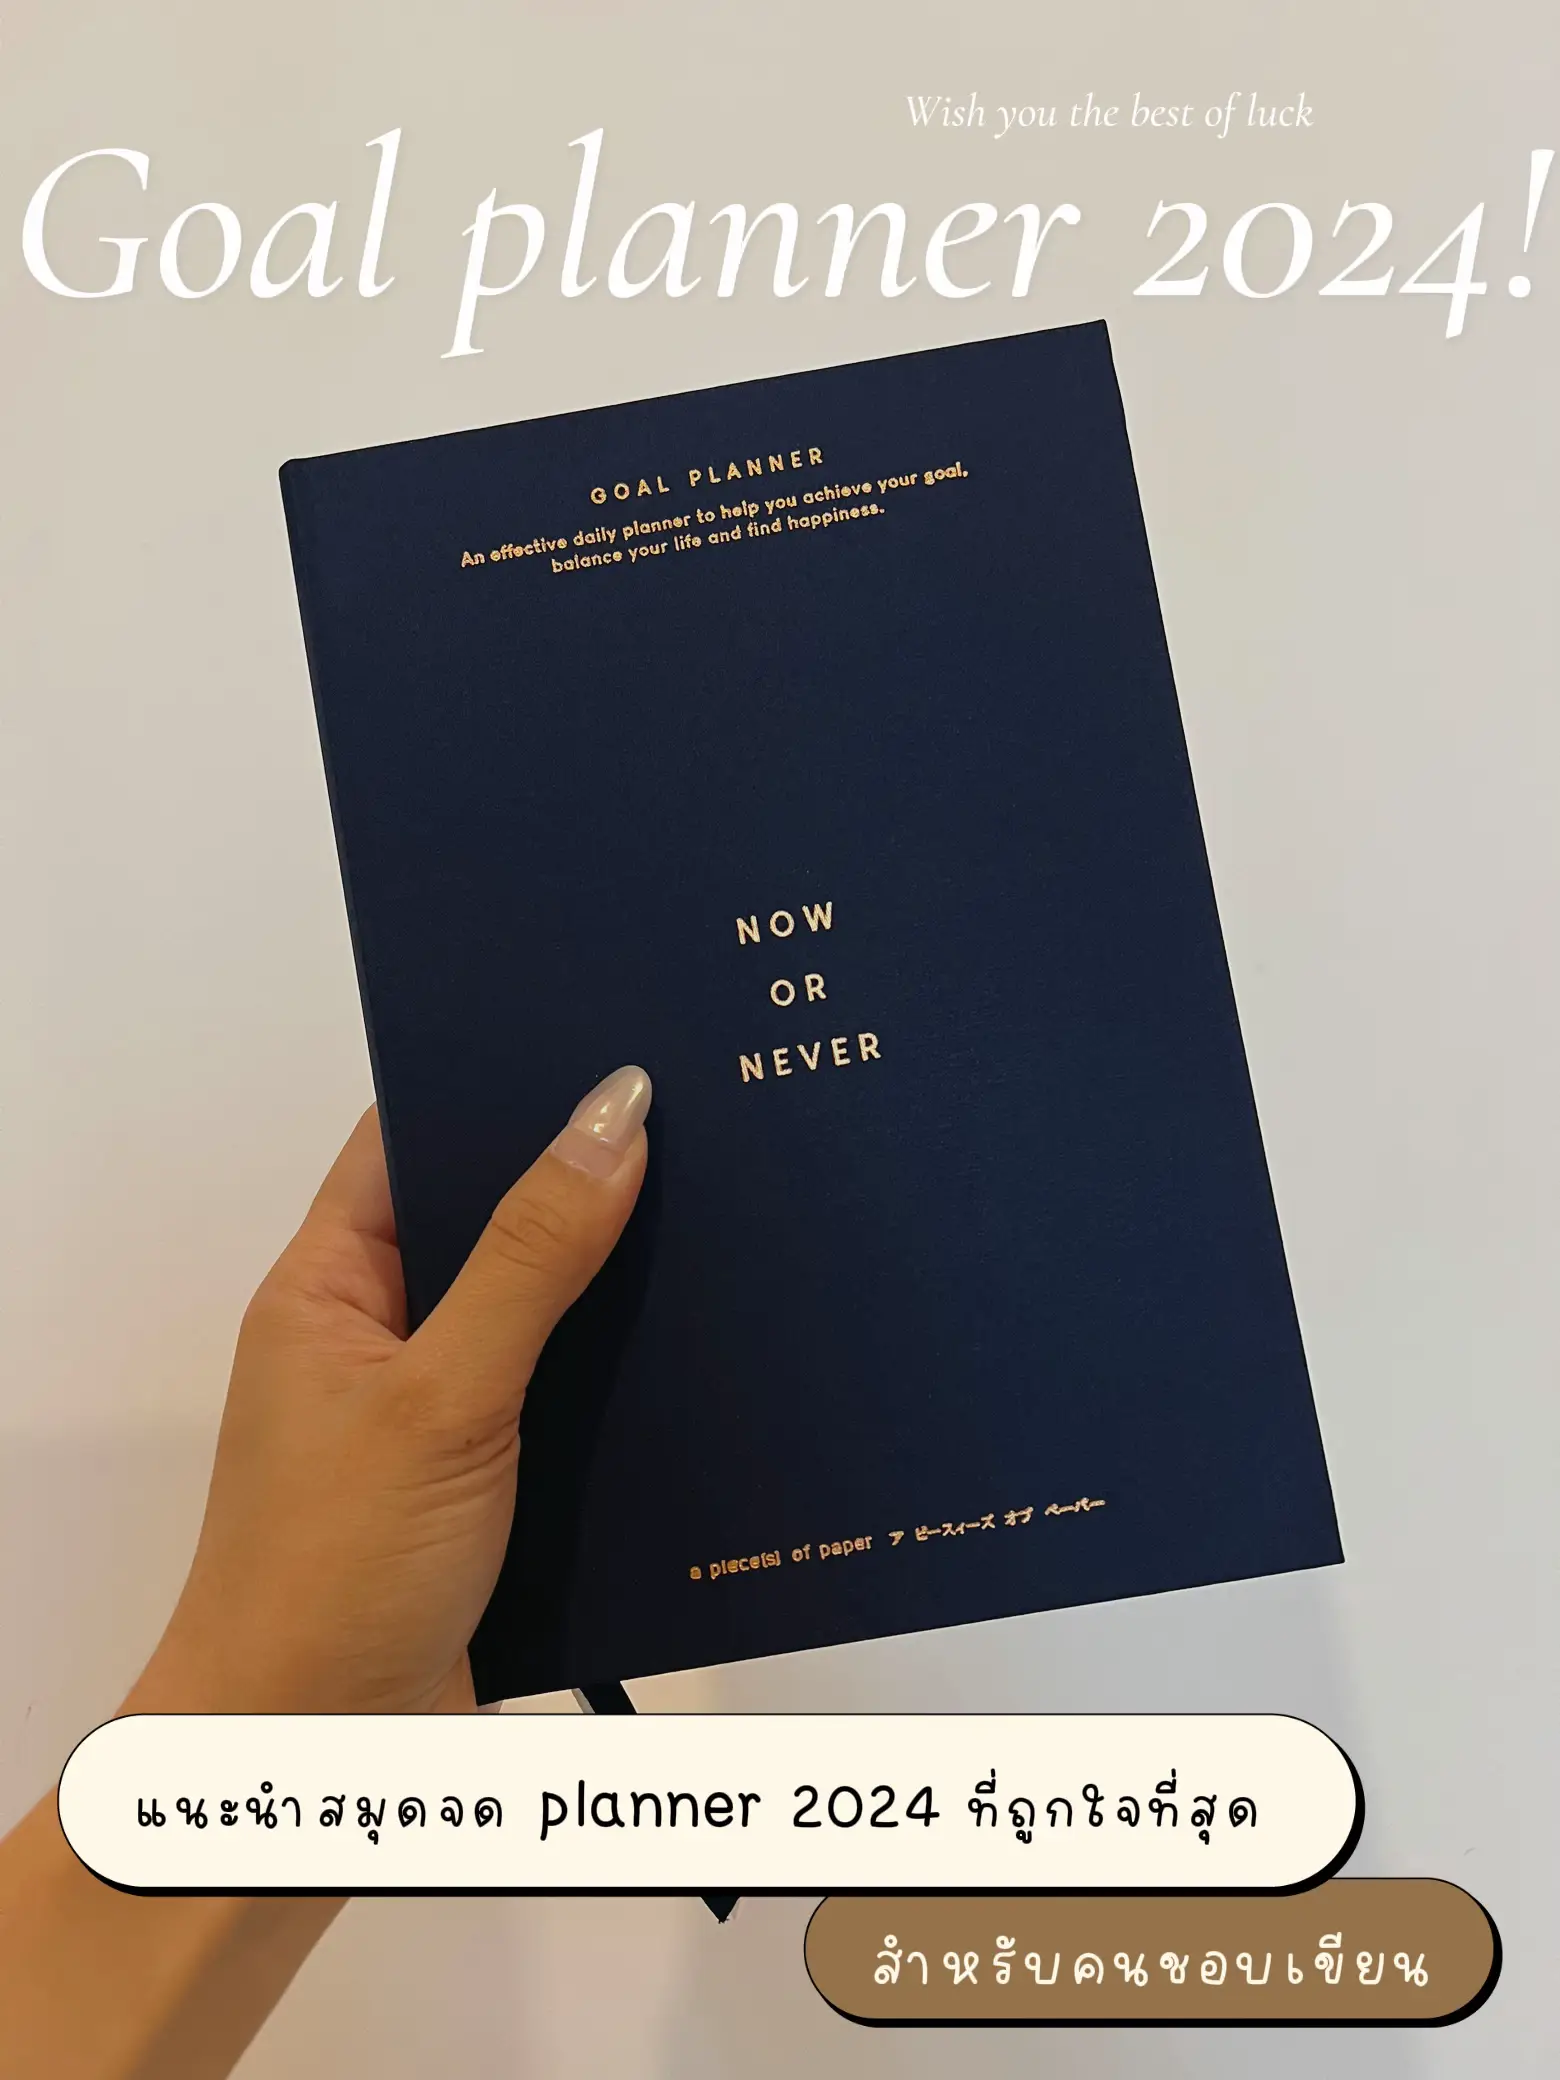 Best Planners of 2024 to Achieve Your Goals